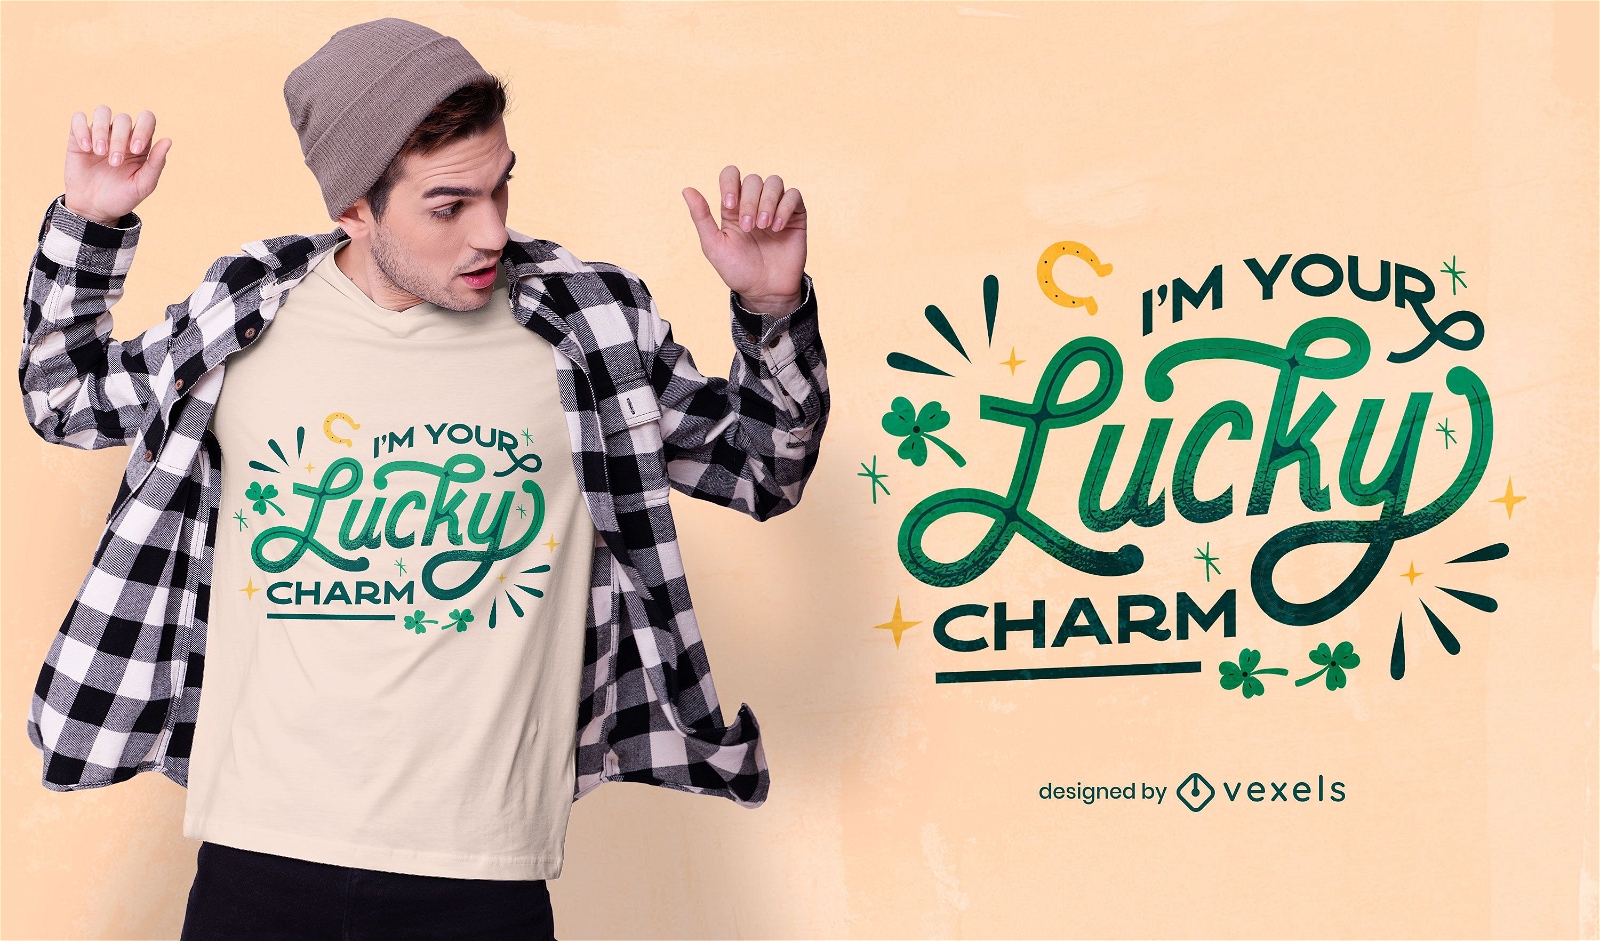 Your lucky charm t-shirt design